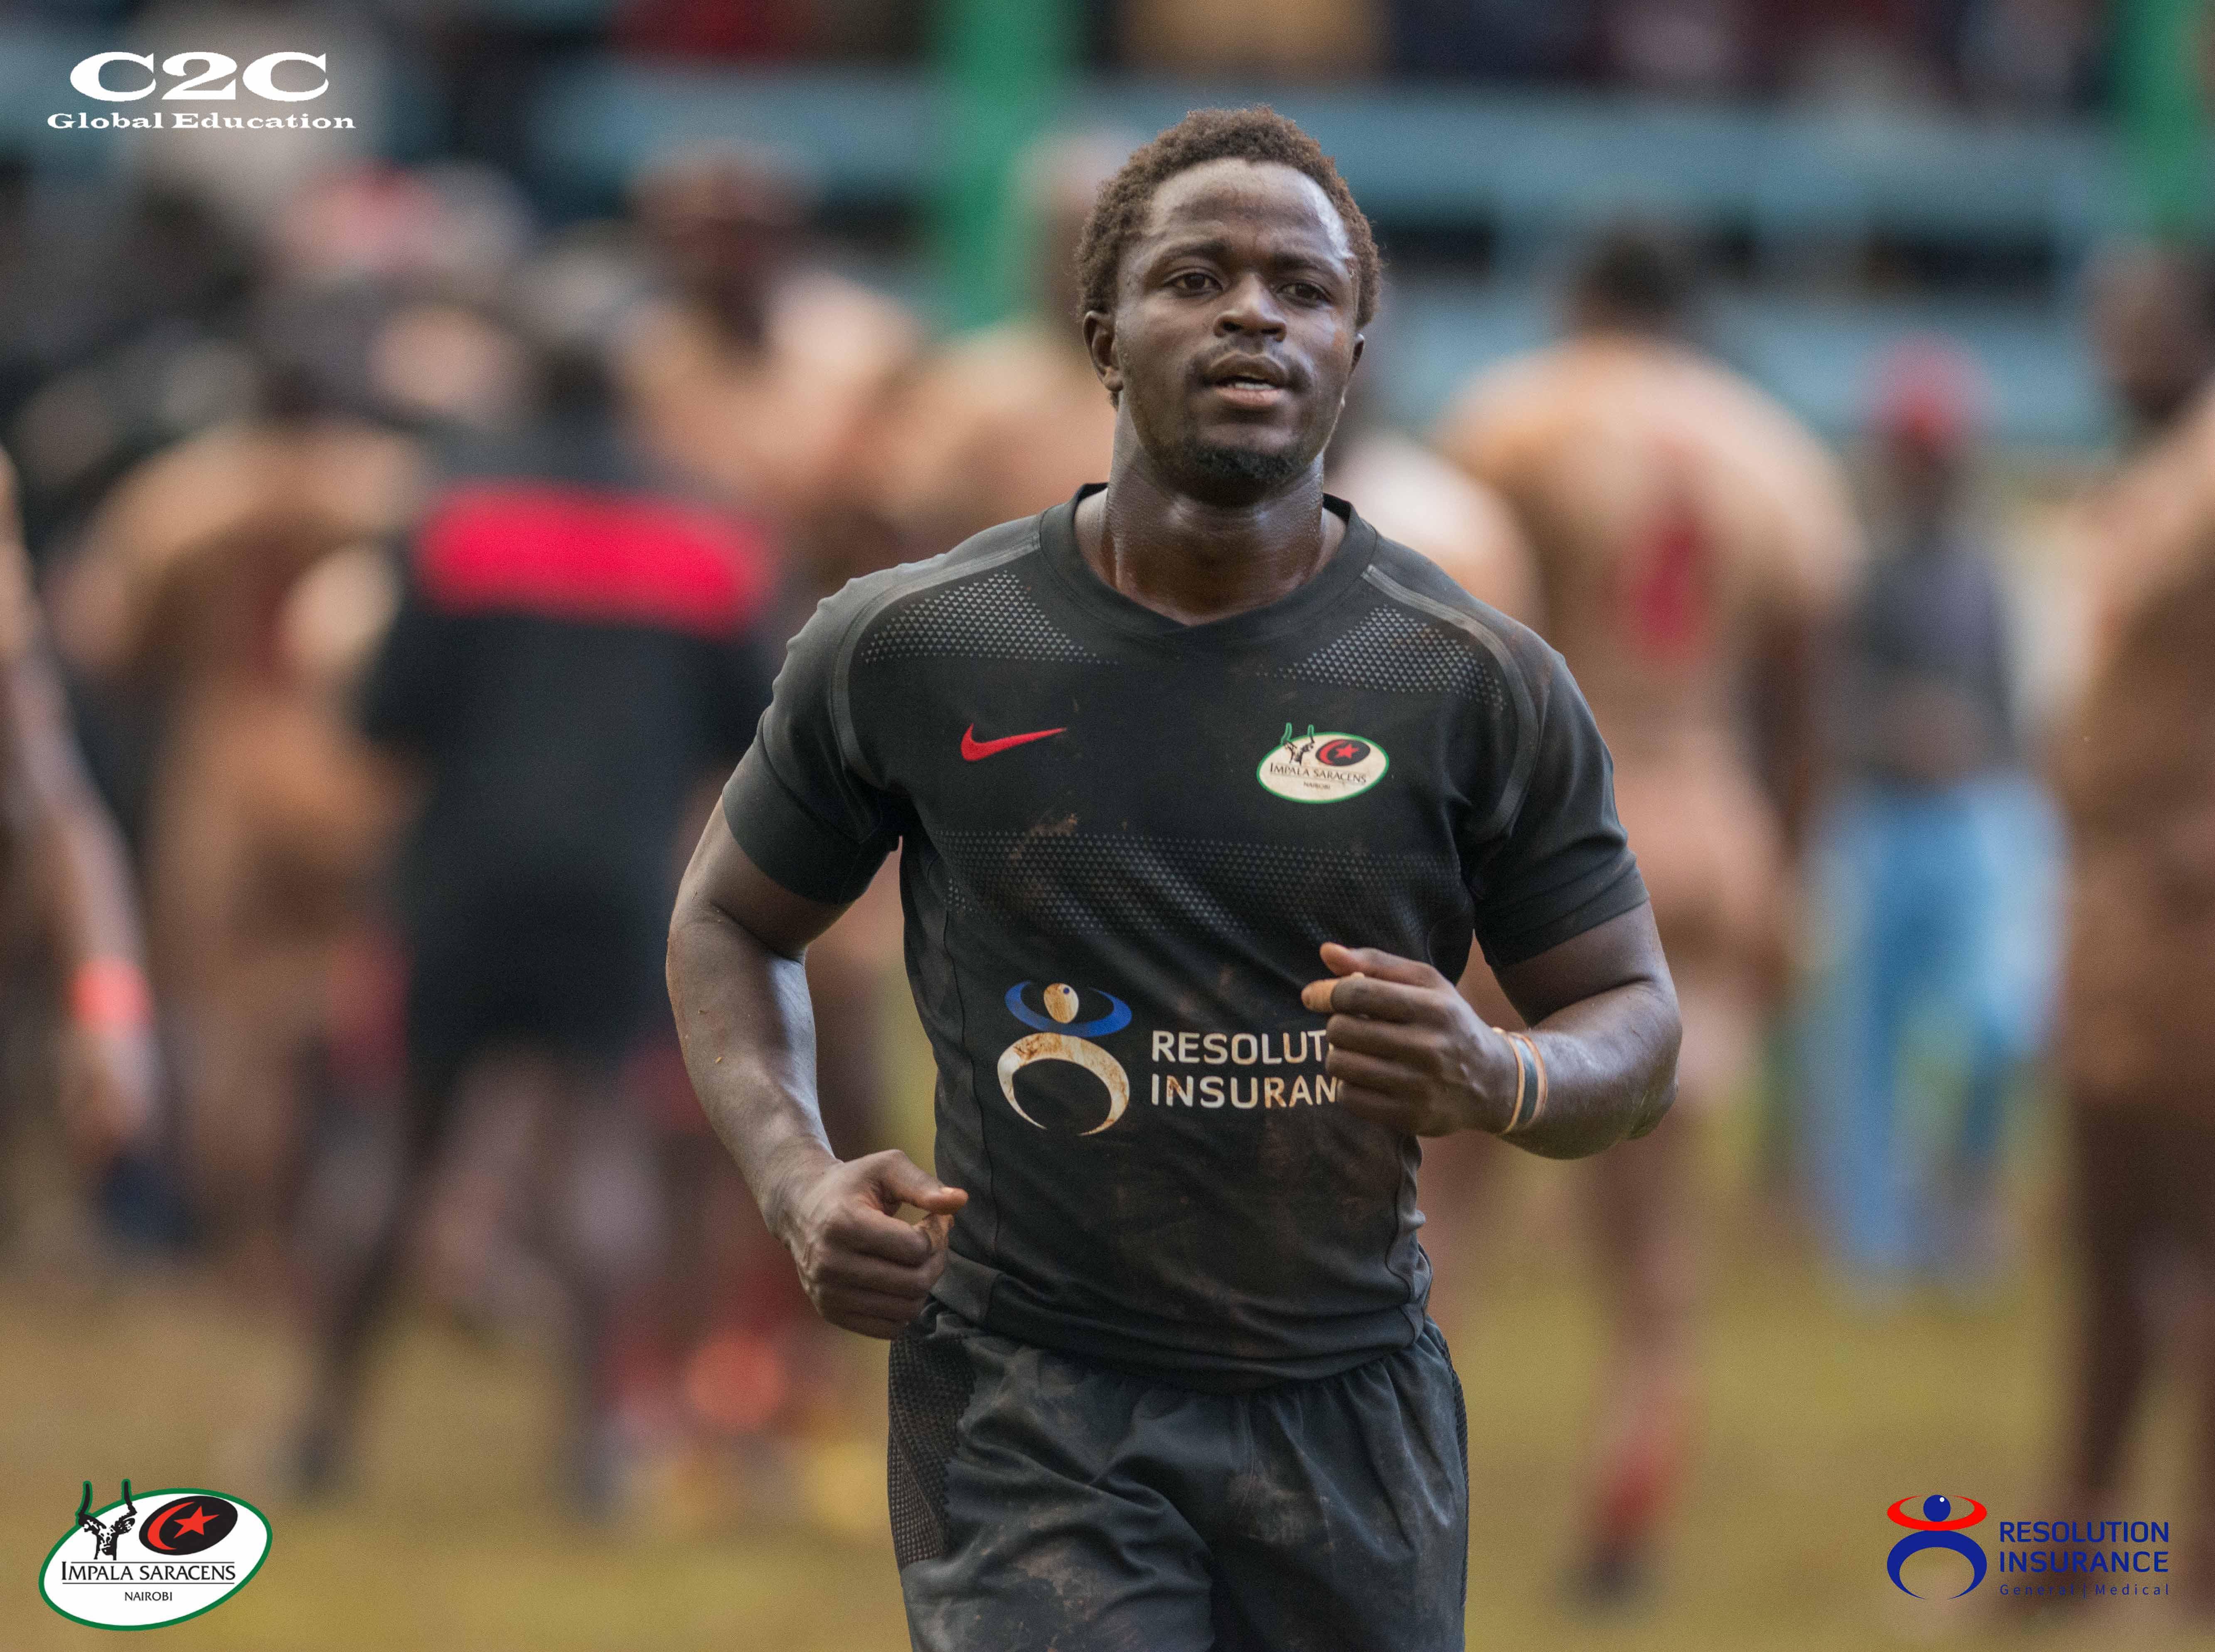 Sam Kimakwa jogging off from the pitch in his first Kenya Cup fixture against Nondies Rfc at ASK Showground Jamhuri.